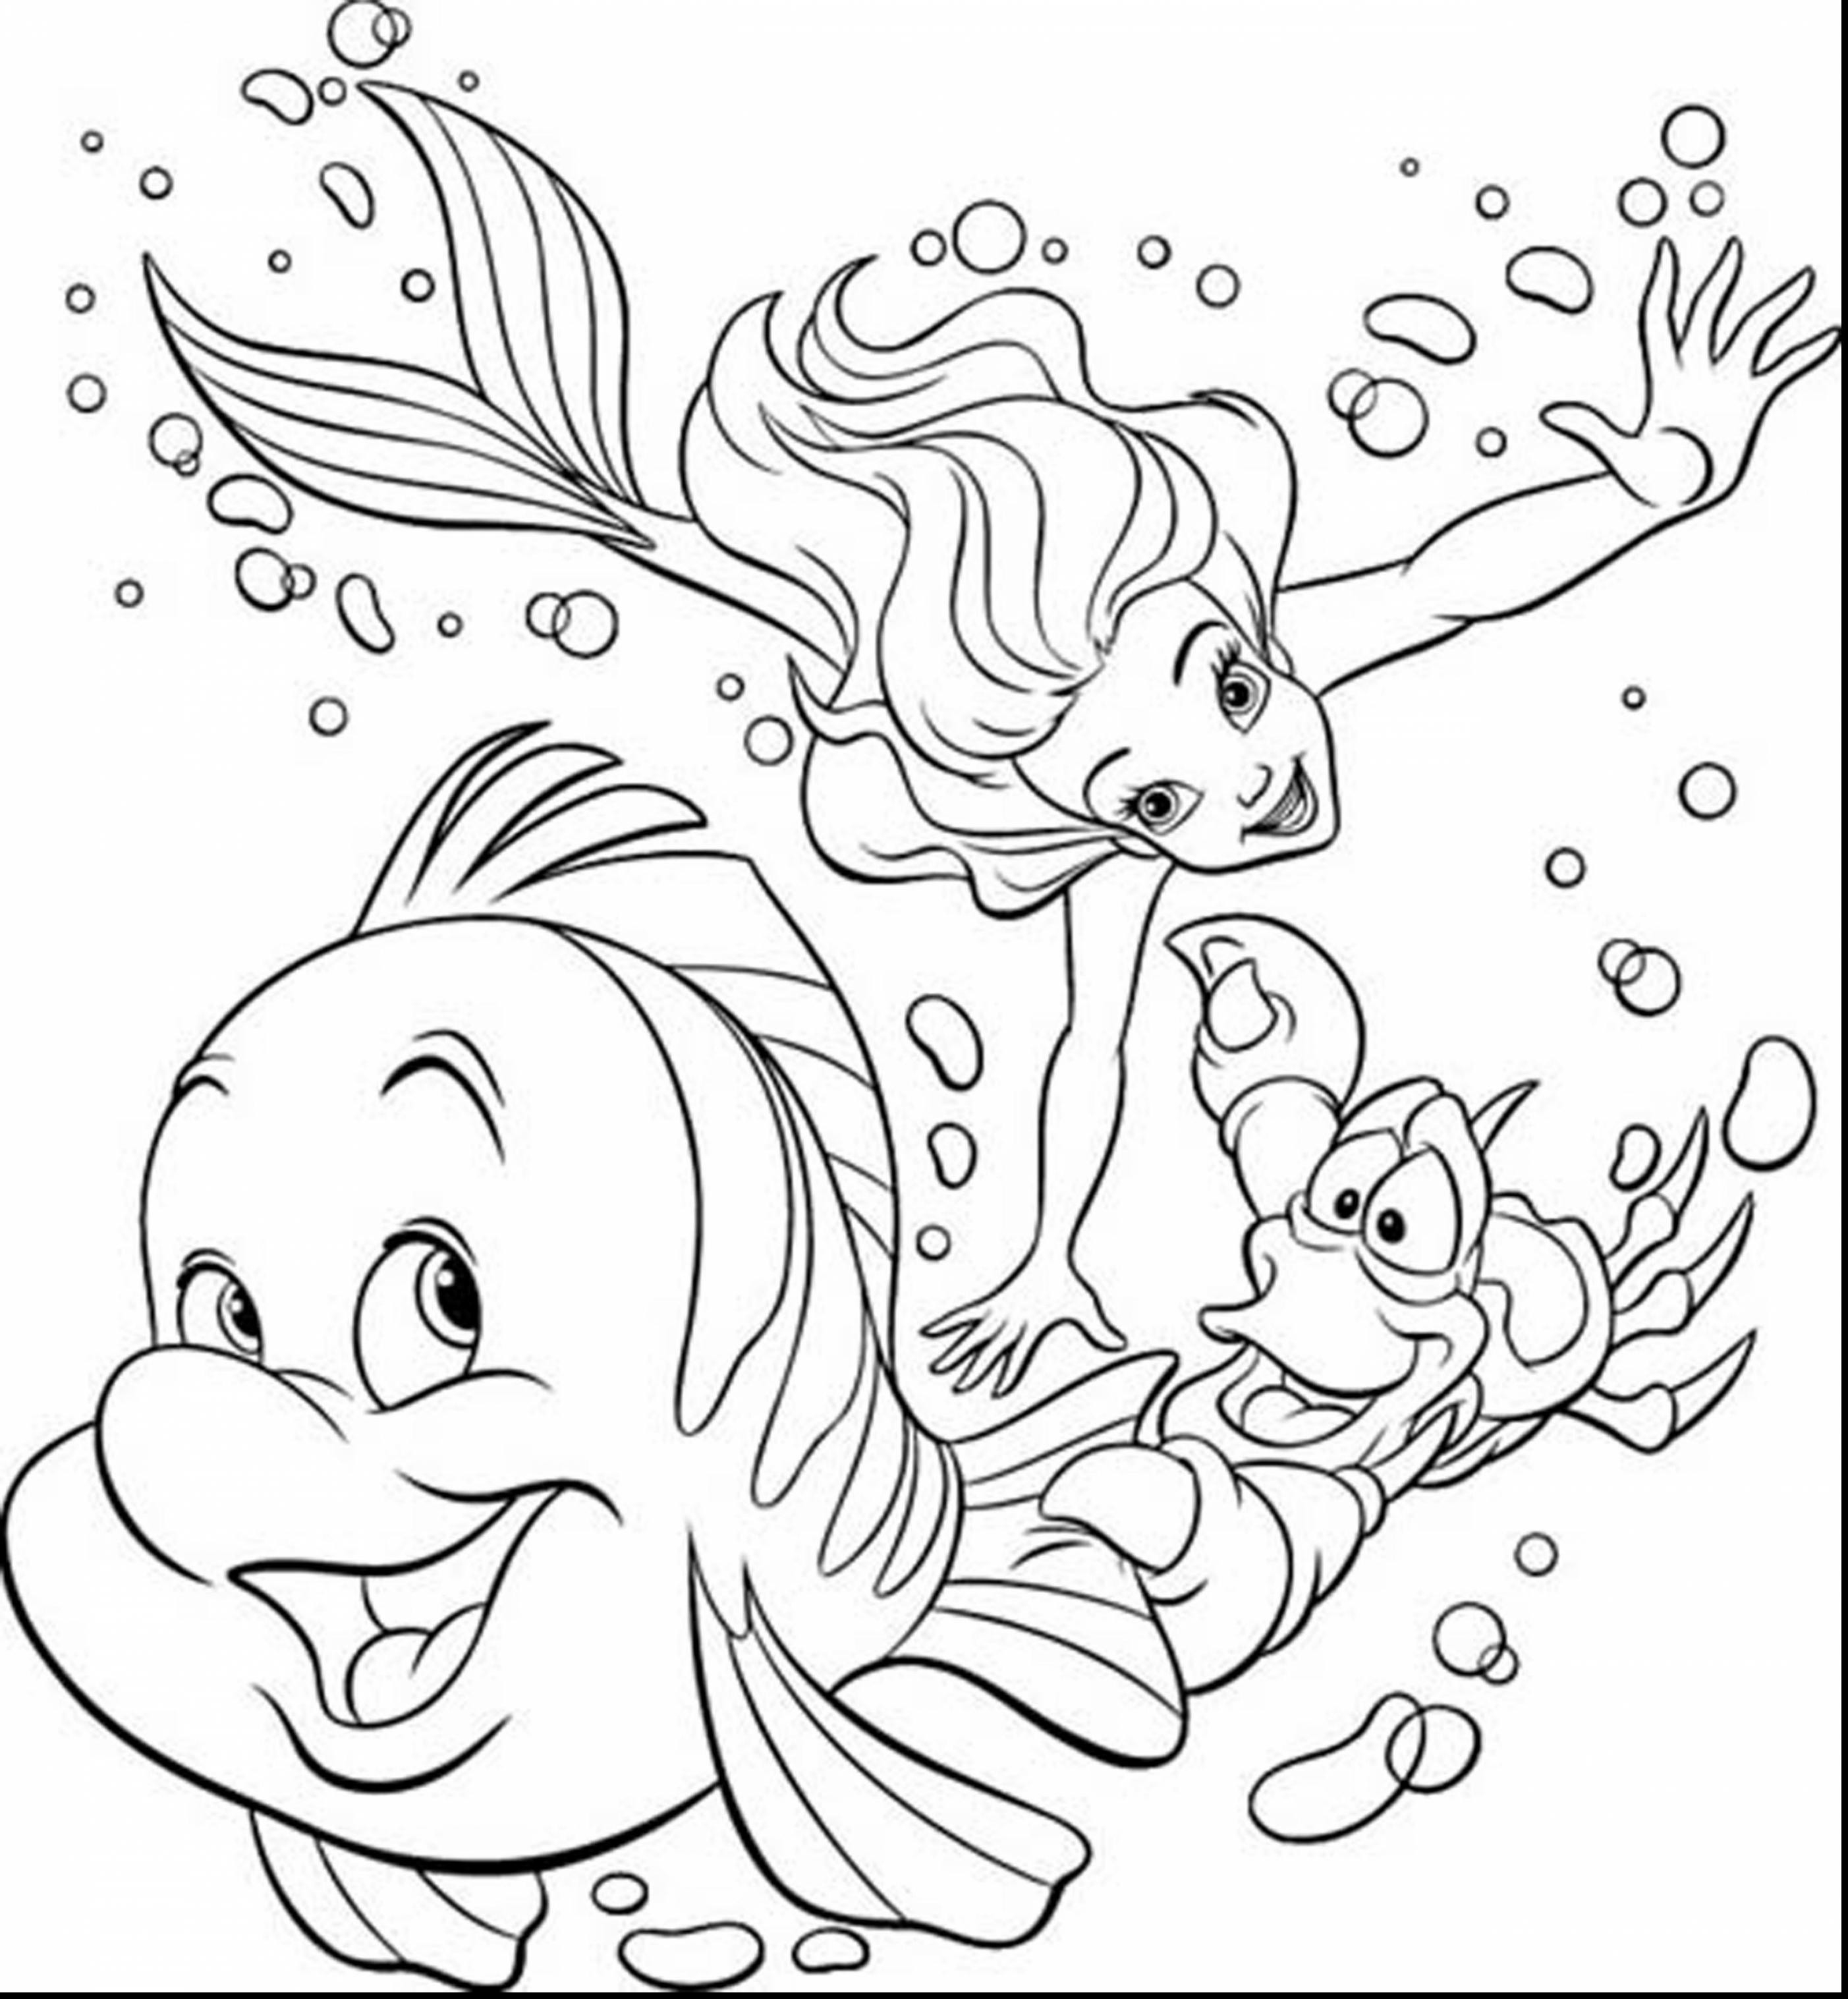 Coloring Pages : Coloring Pages Disney Free Printable Teen - Free Printable Princess Jasmine Coloring Pages